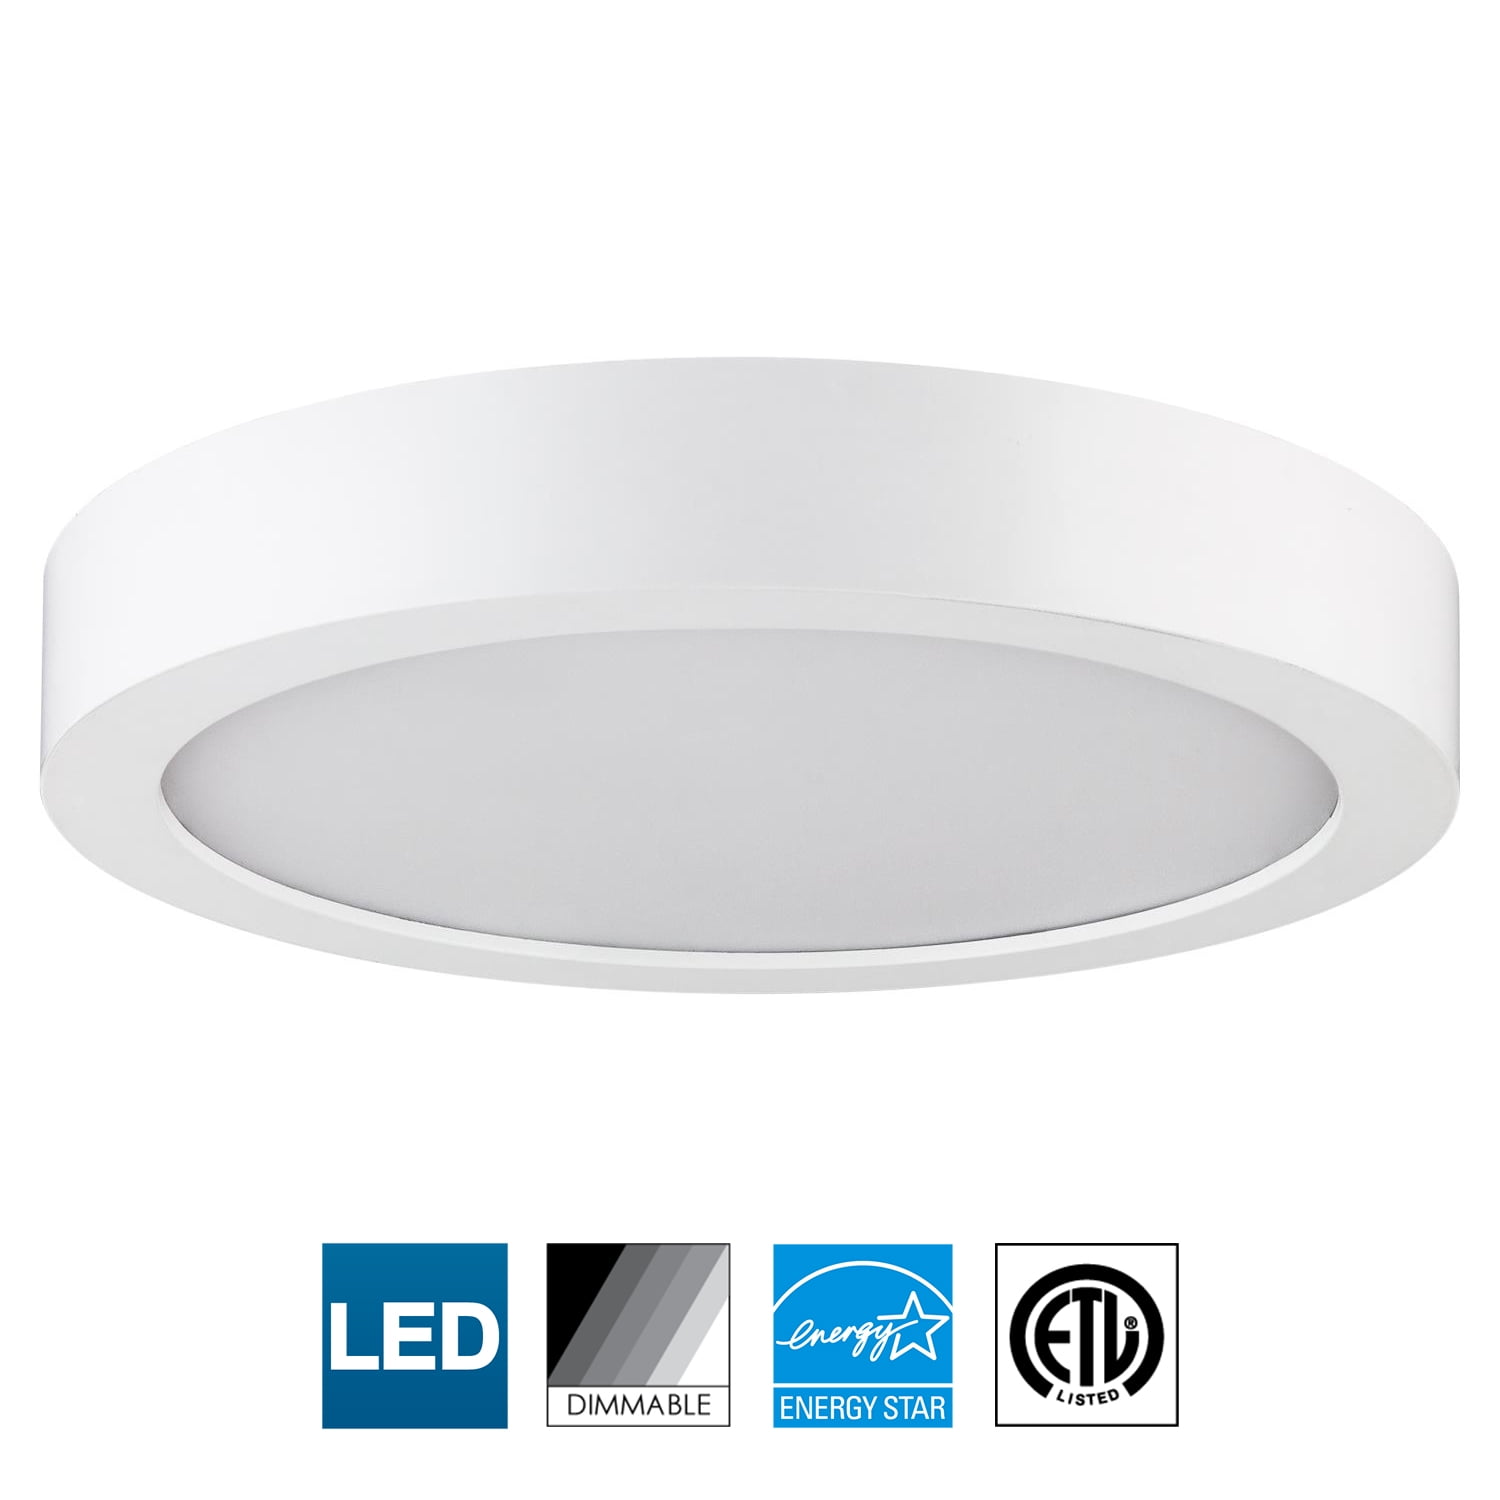 Sunlite Led 9 Inch Round Surface Mount